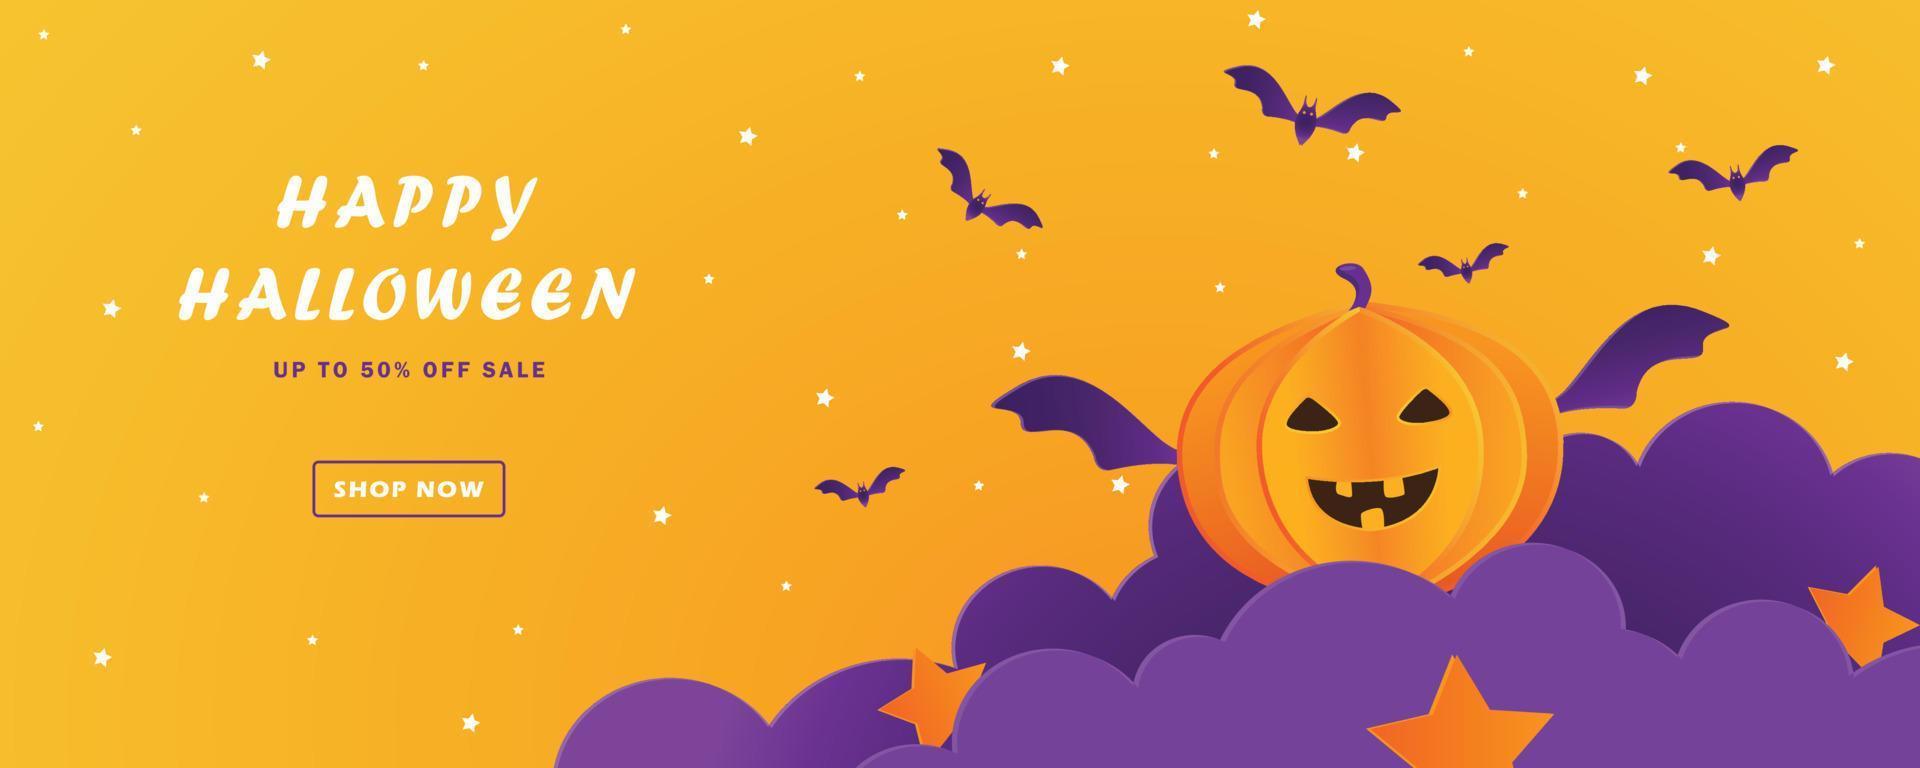 promotion halloween banner template with cloud paper cut style and pumpkin character, bat ornament, flash sale, discount layout orange color, background vector